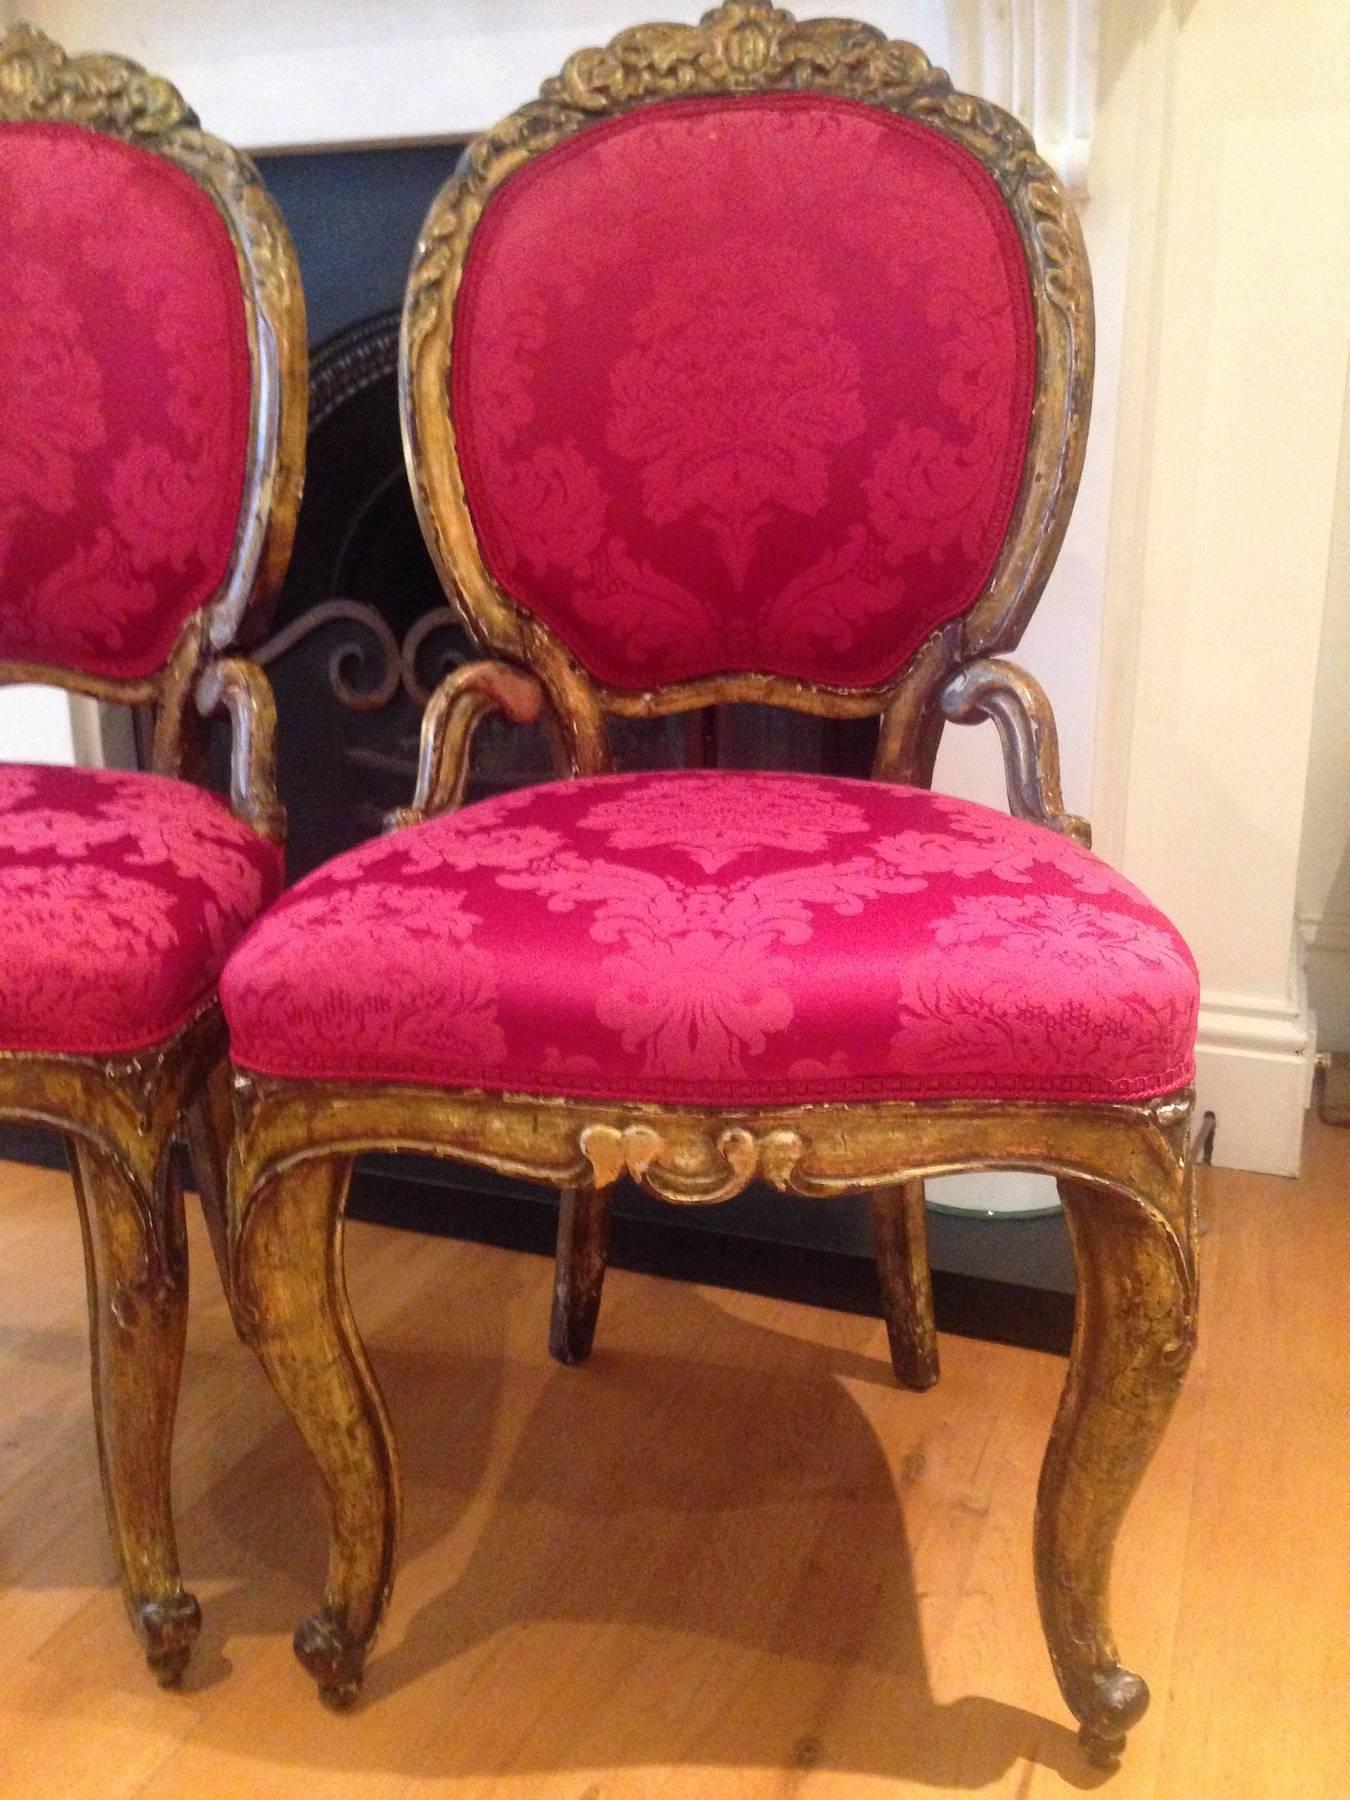 A pair of pretty partial gilt Italian 18th century side chairs, reupholstered in deep red and pink damask. The chairs have undergone restoration at some point and are still in need of a little more work on them. Some of the gesso has chipped off and